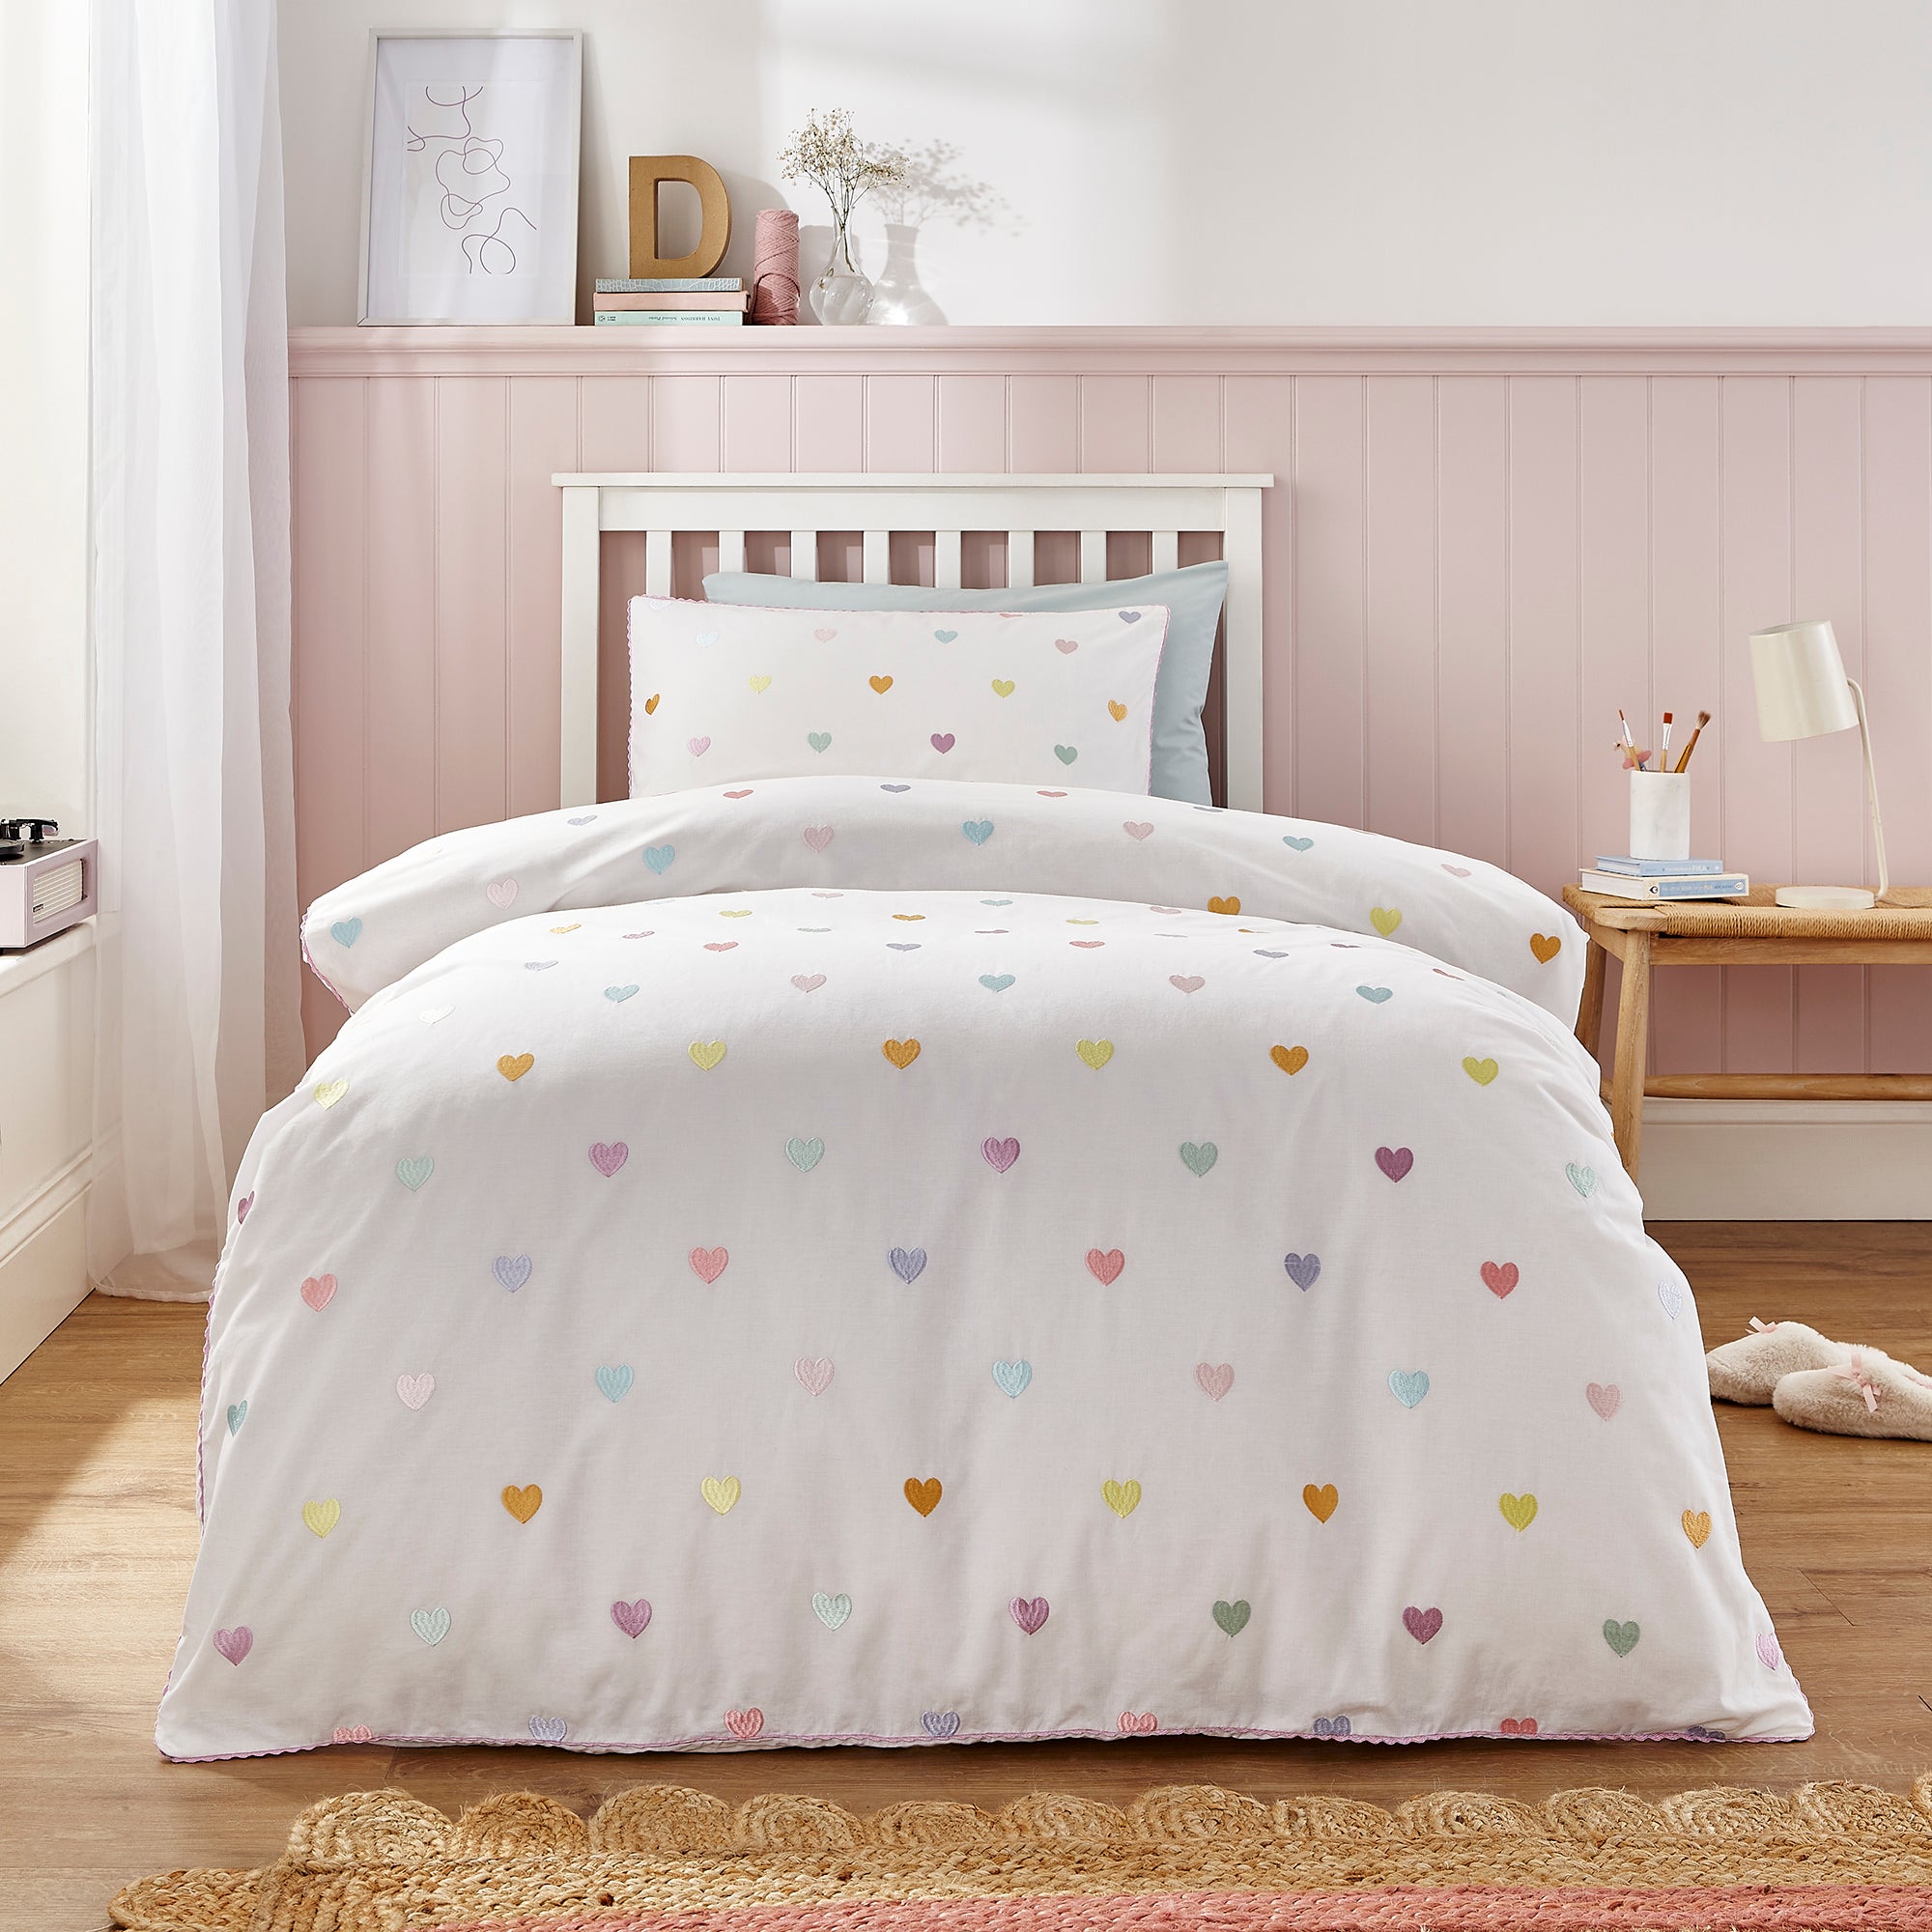 Embroidered Hearts Single Duvet Cover and Pillowcase Set